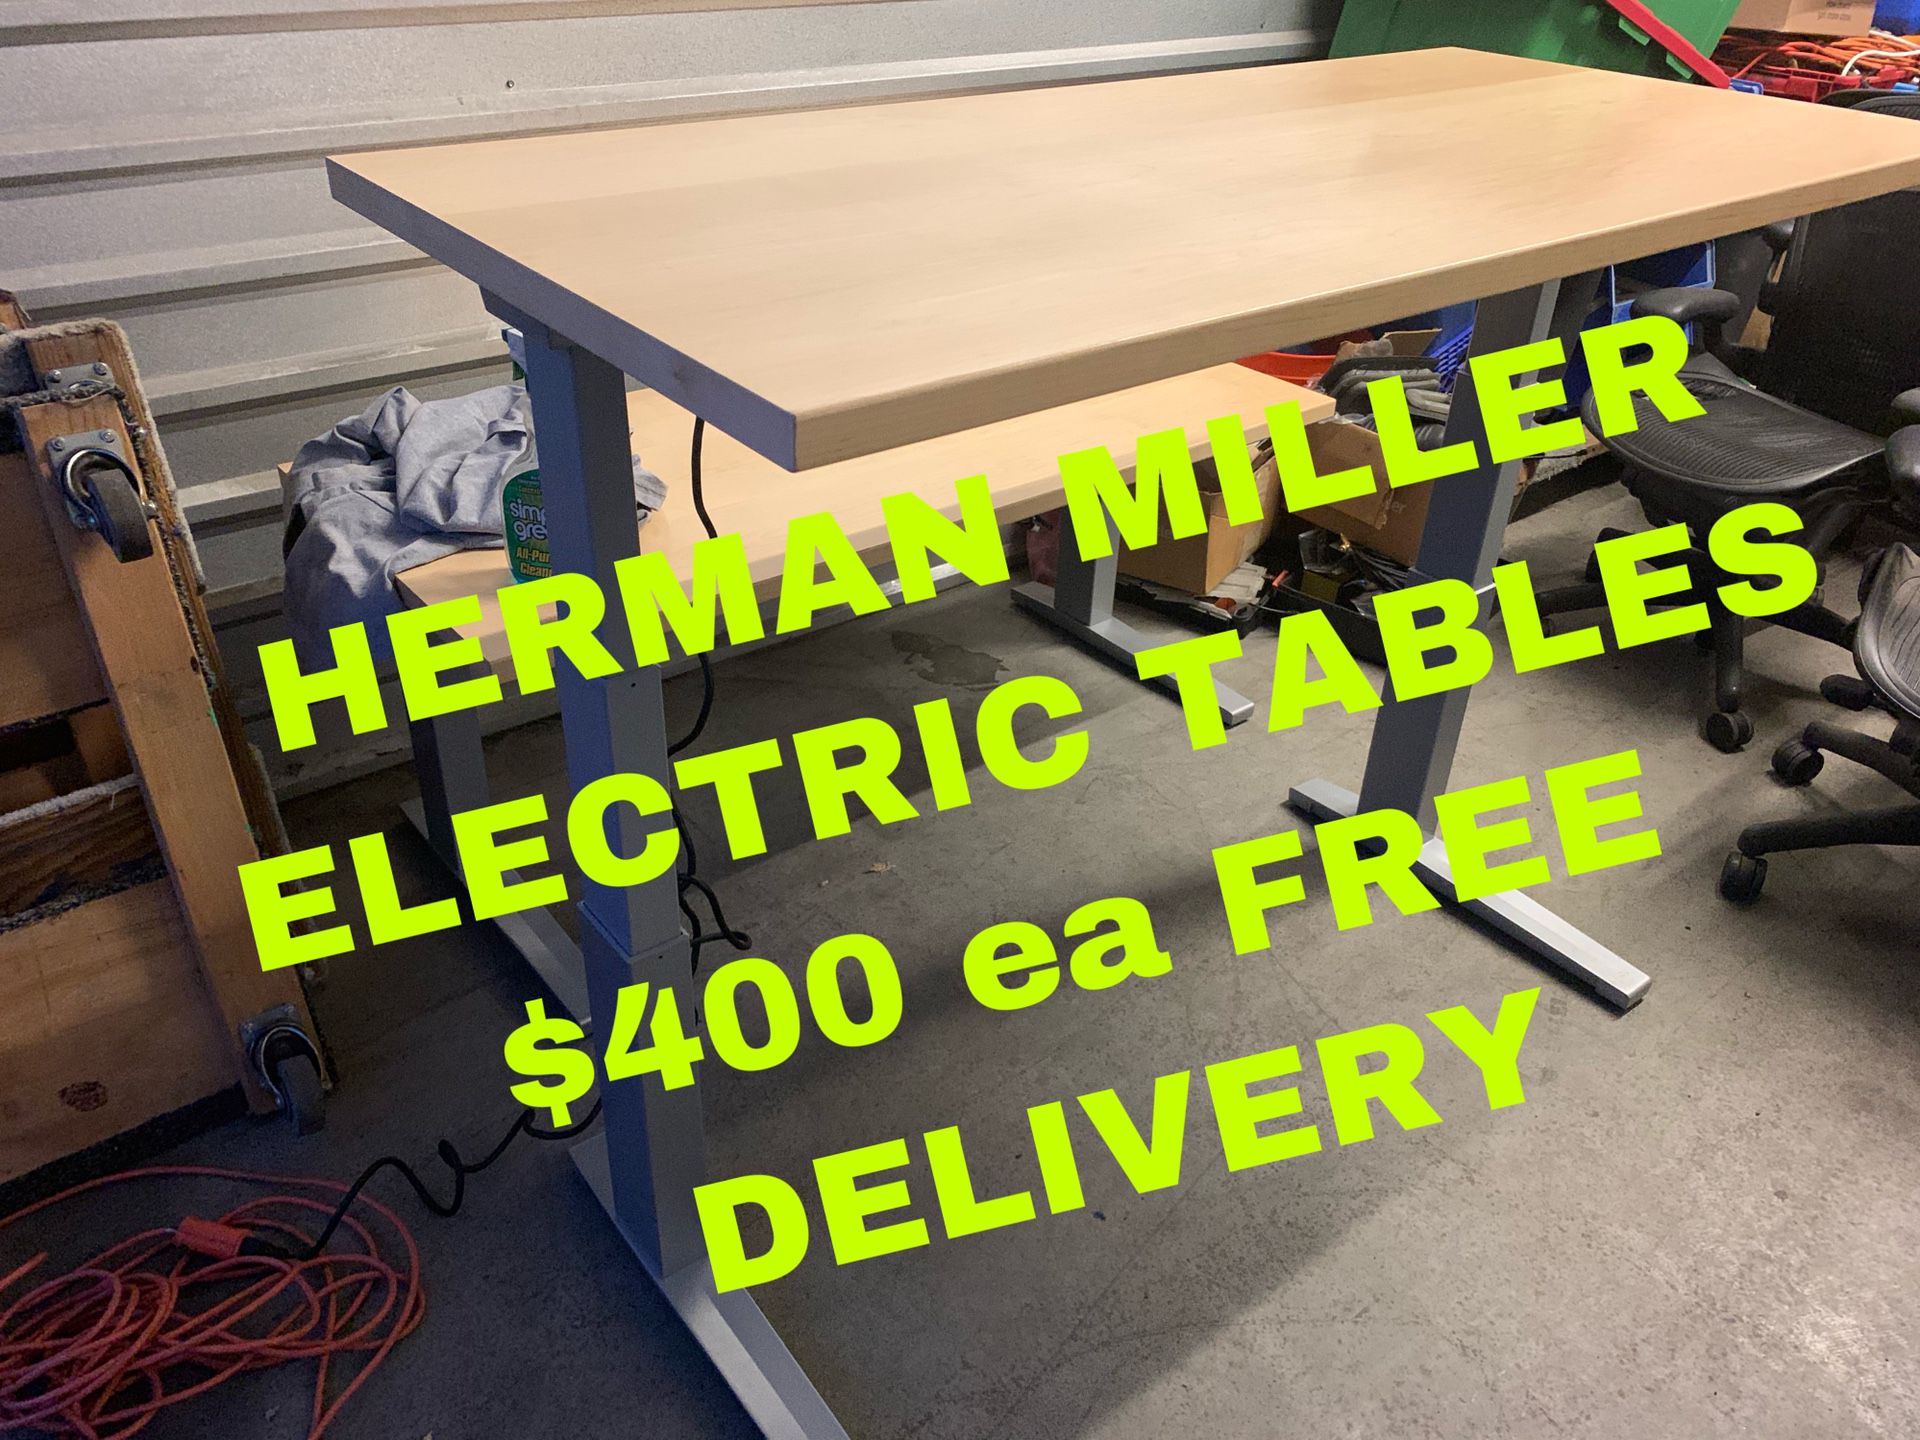 HERMAN MILLER ELECTRIC SIT STAND TABLES $400ea, AERON OFFICE CHAIRS $380 Each